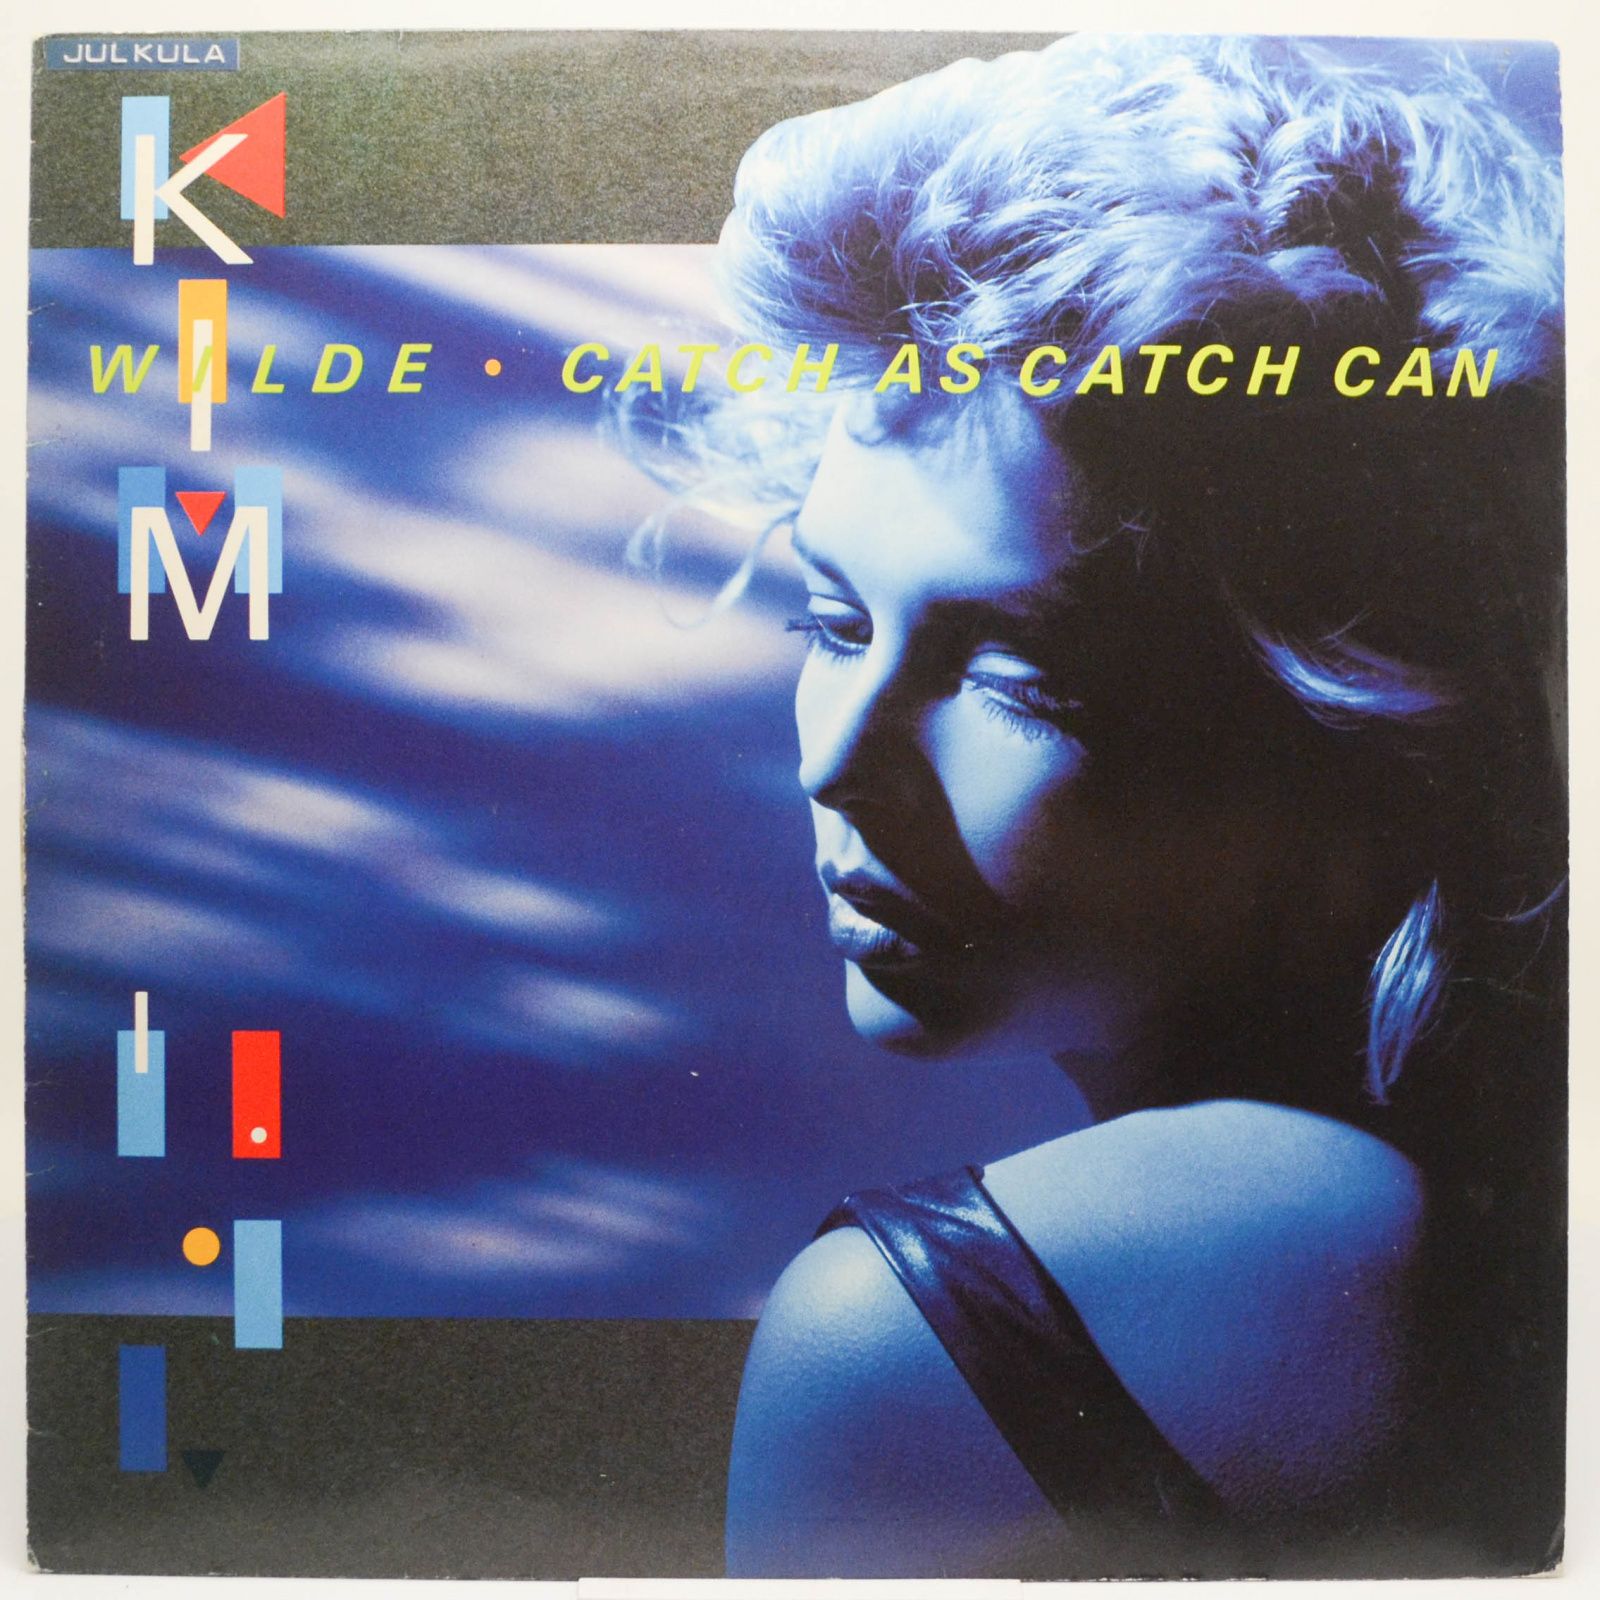 Catch As Catch Can, 1983